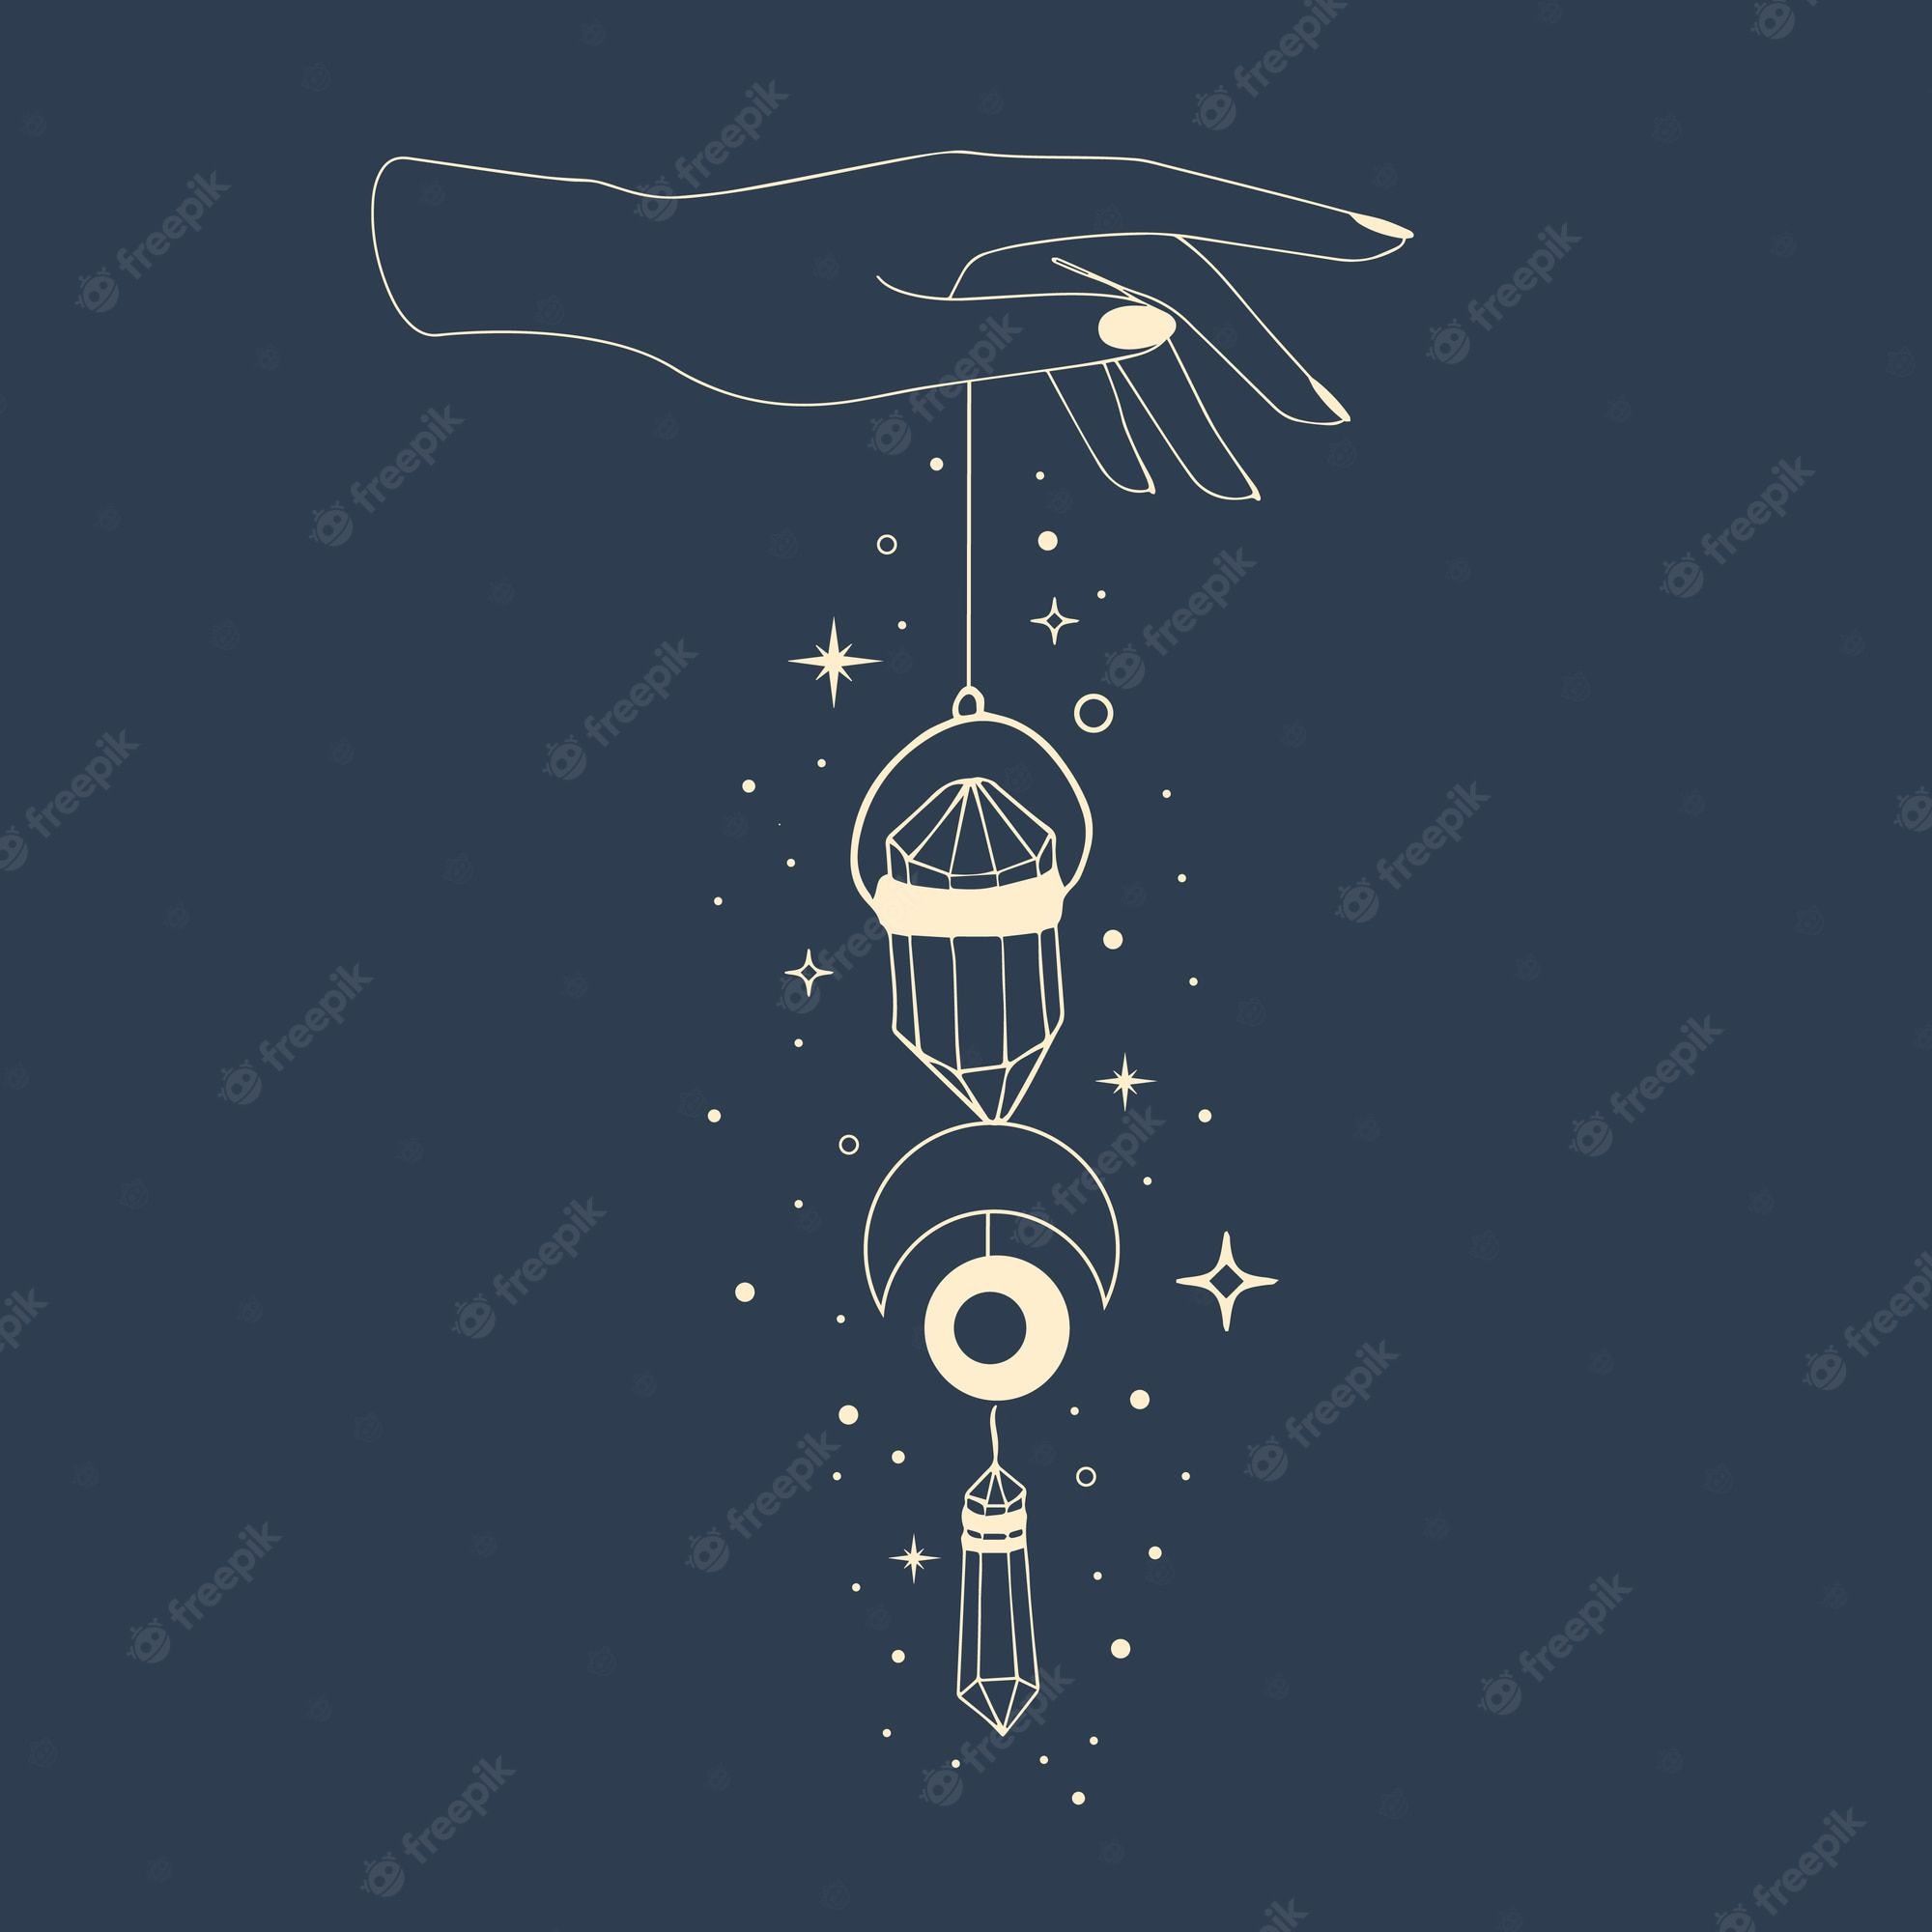 A hand holding an object with stars and planets png - Spiritual